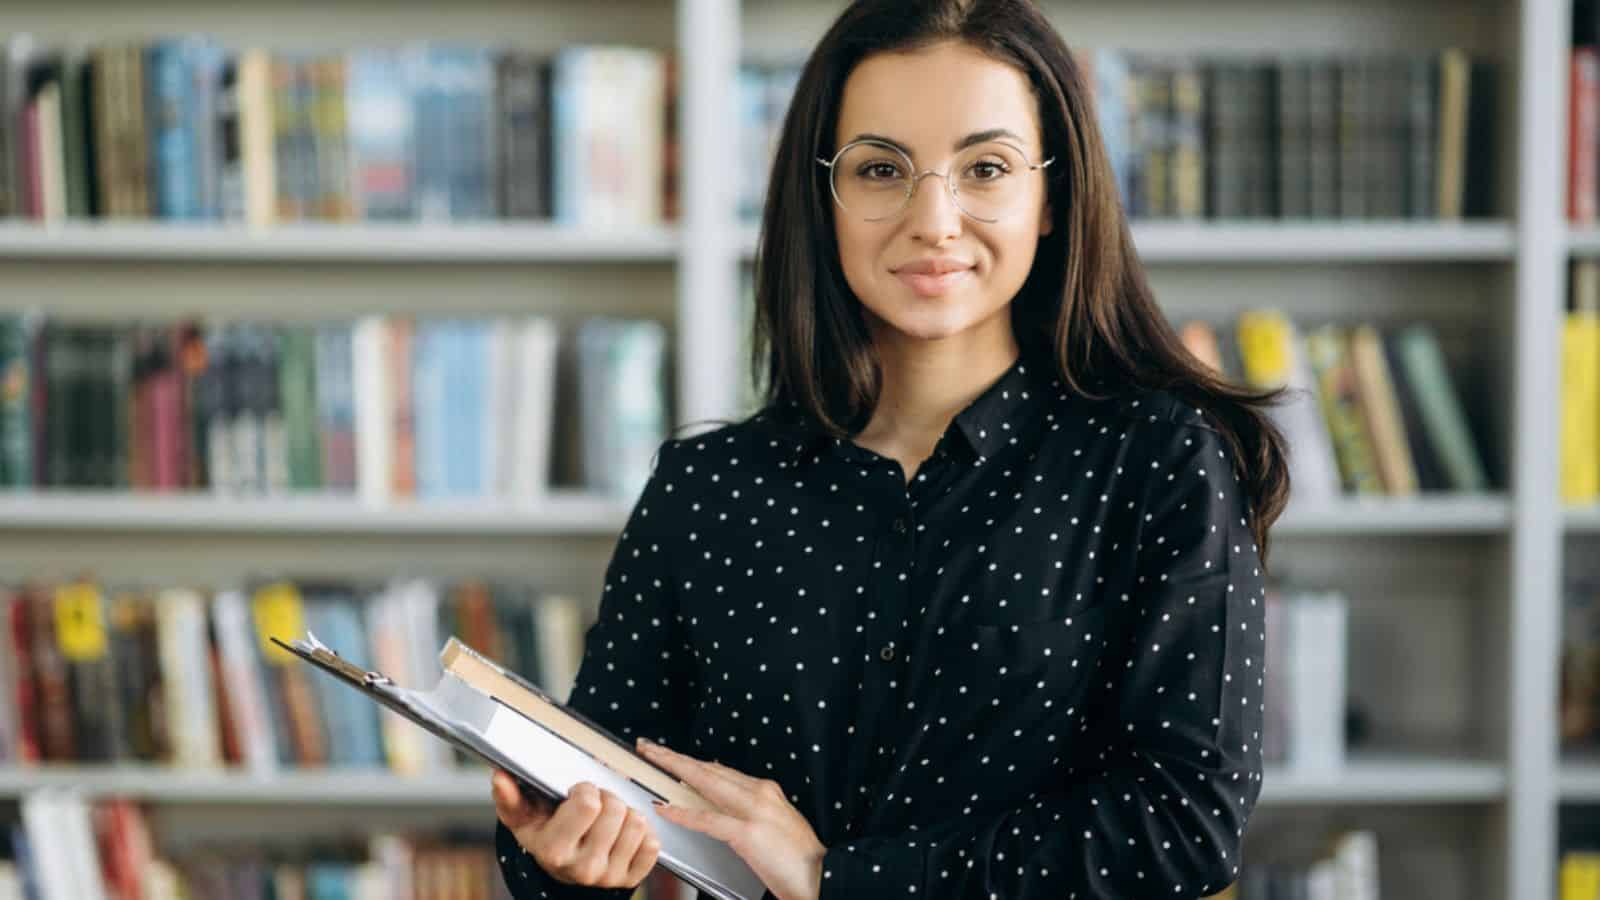 Smiling woman holding books